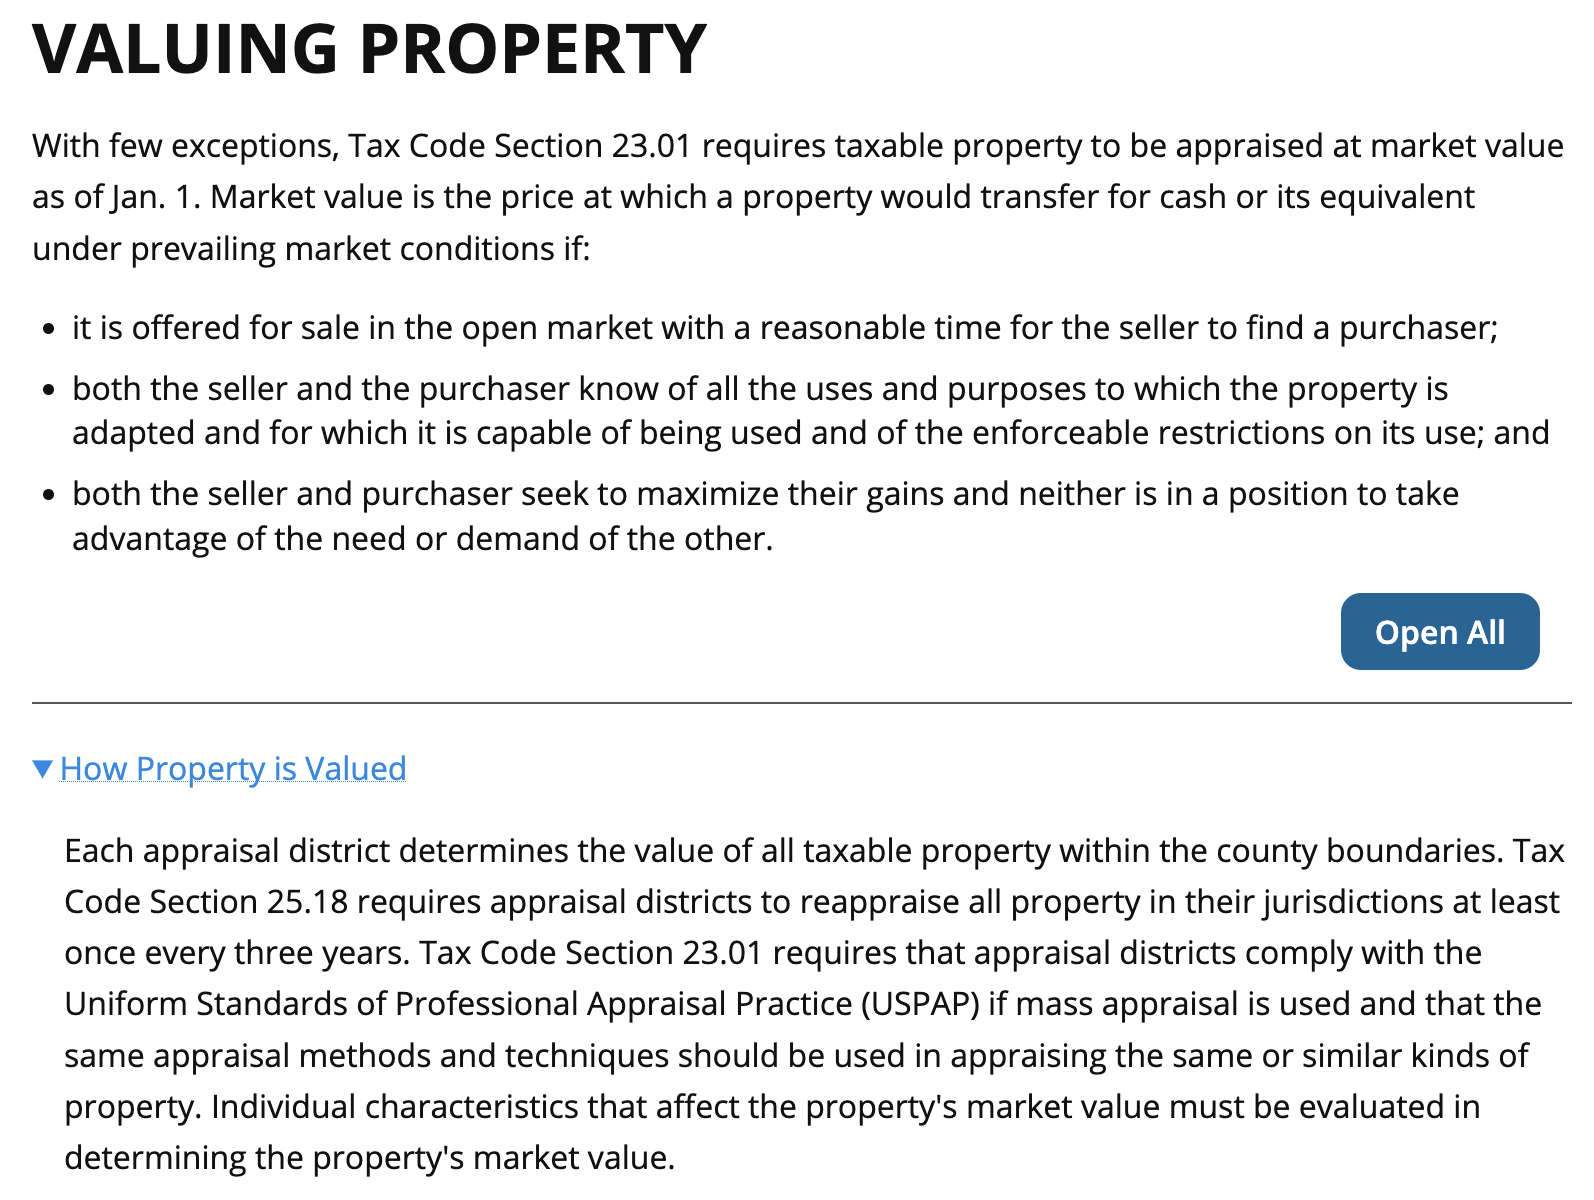 A screenshot of a digital document or web page displaying information about how property is valued for tax purposes, with a section on determining market value opened for detailed explanation